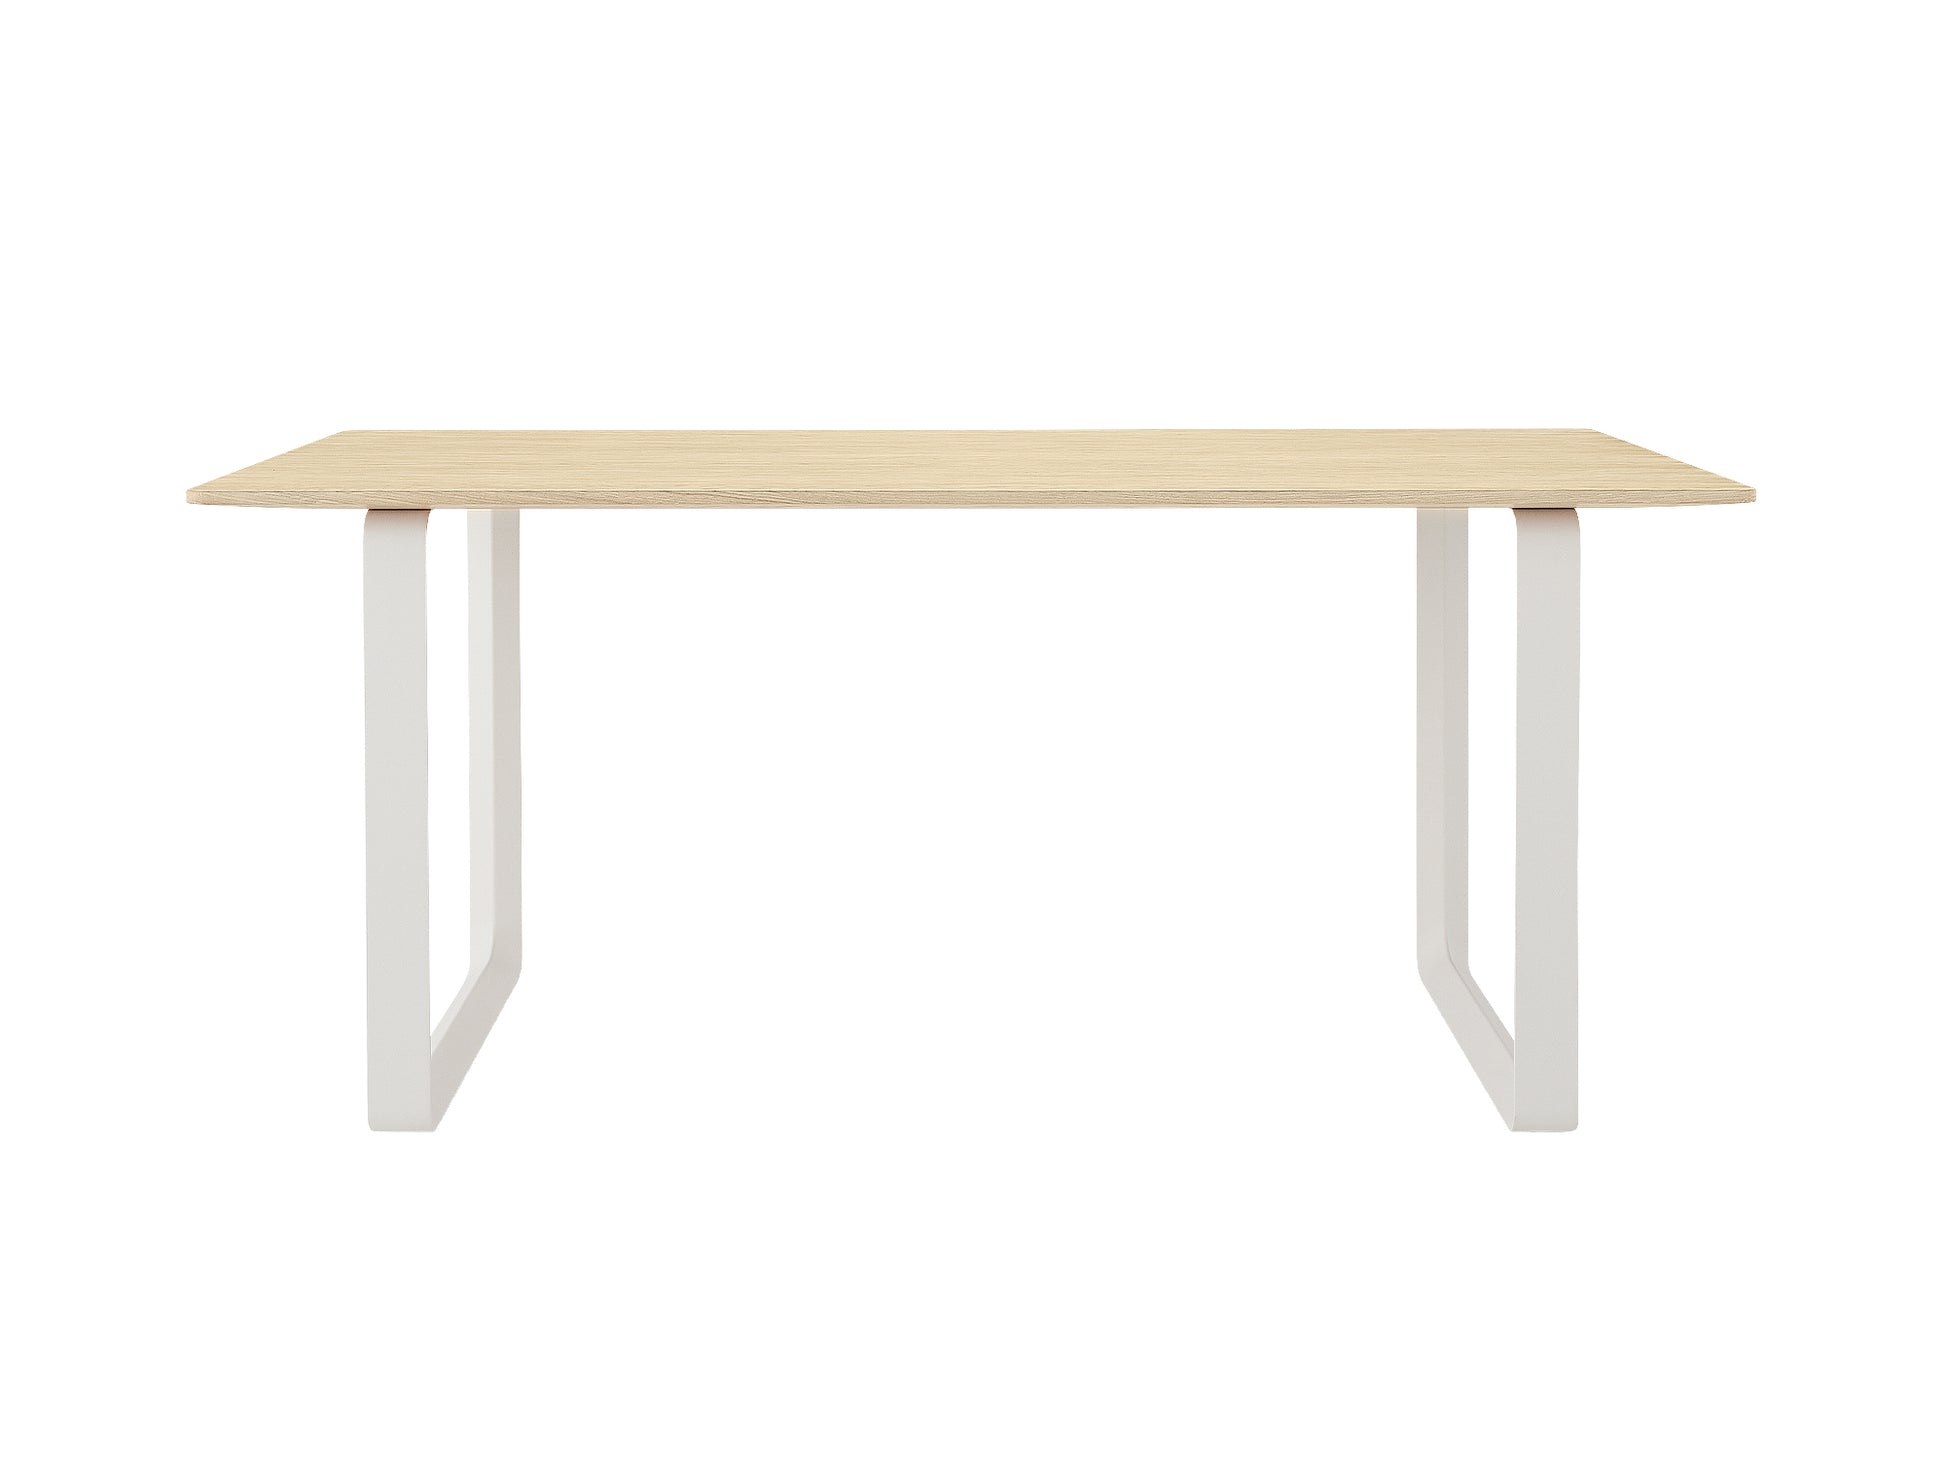 70/70 Table - Solid Oak Table Top with White Base / 170 x 85cm